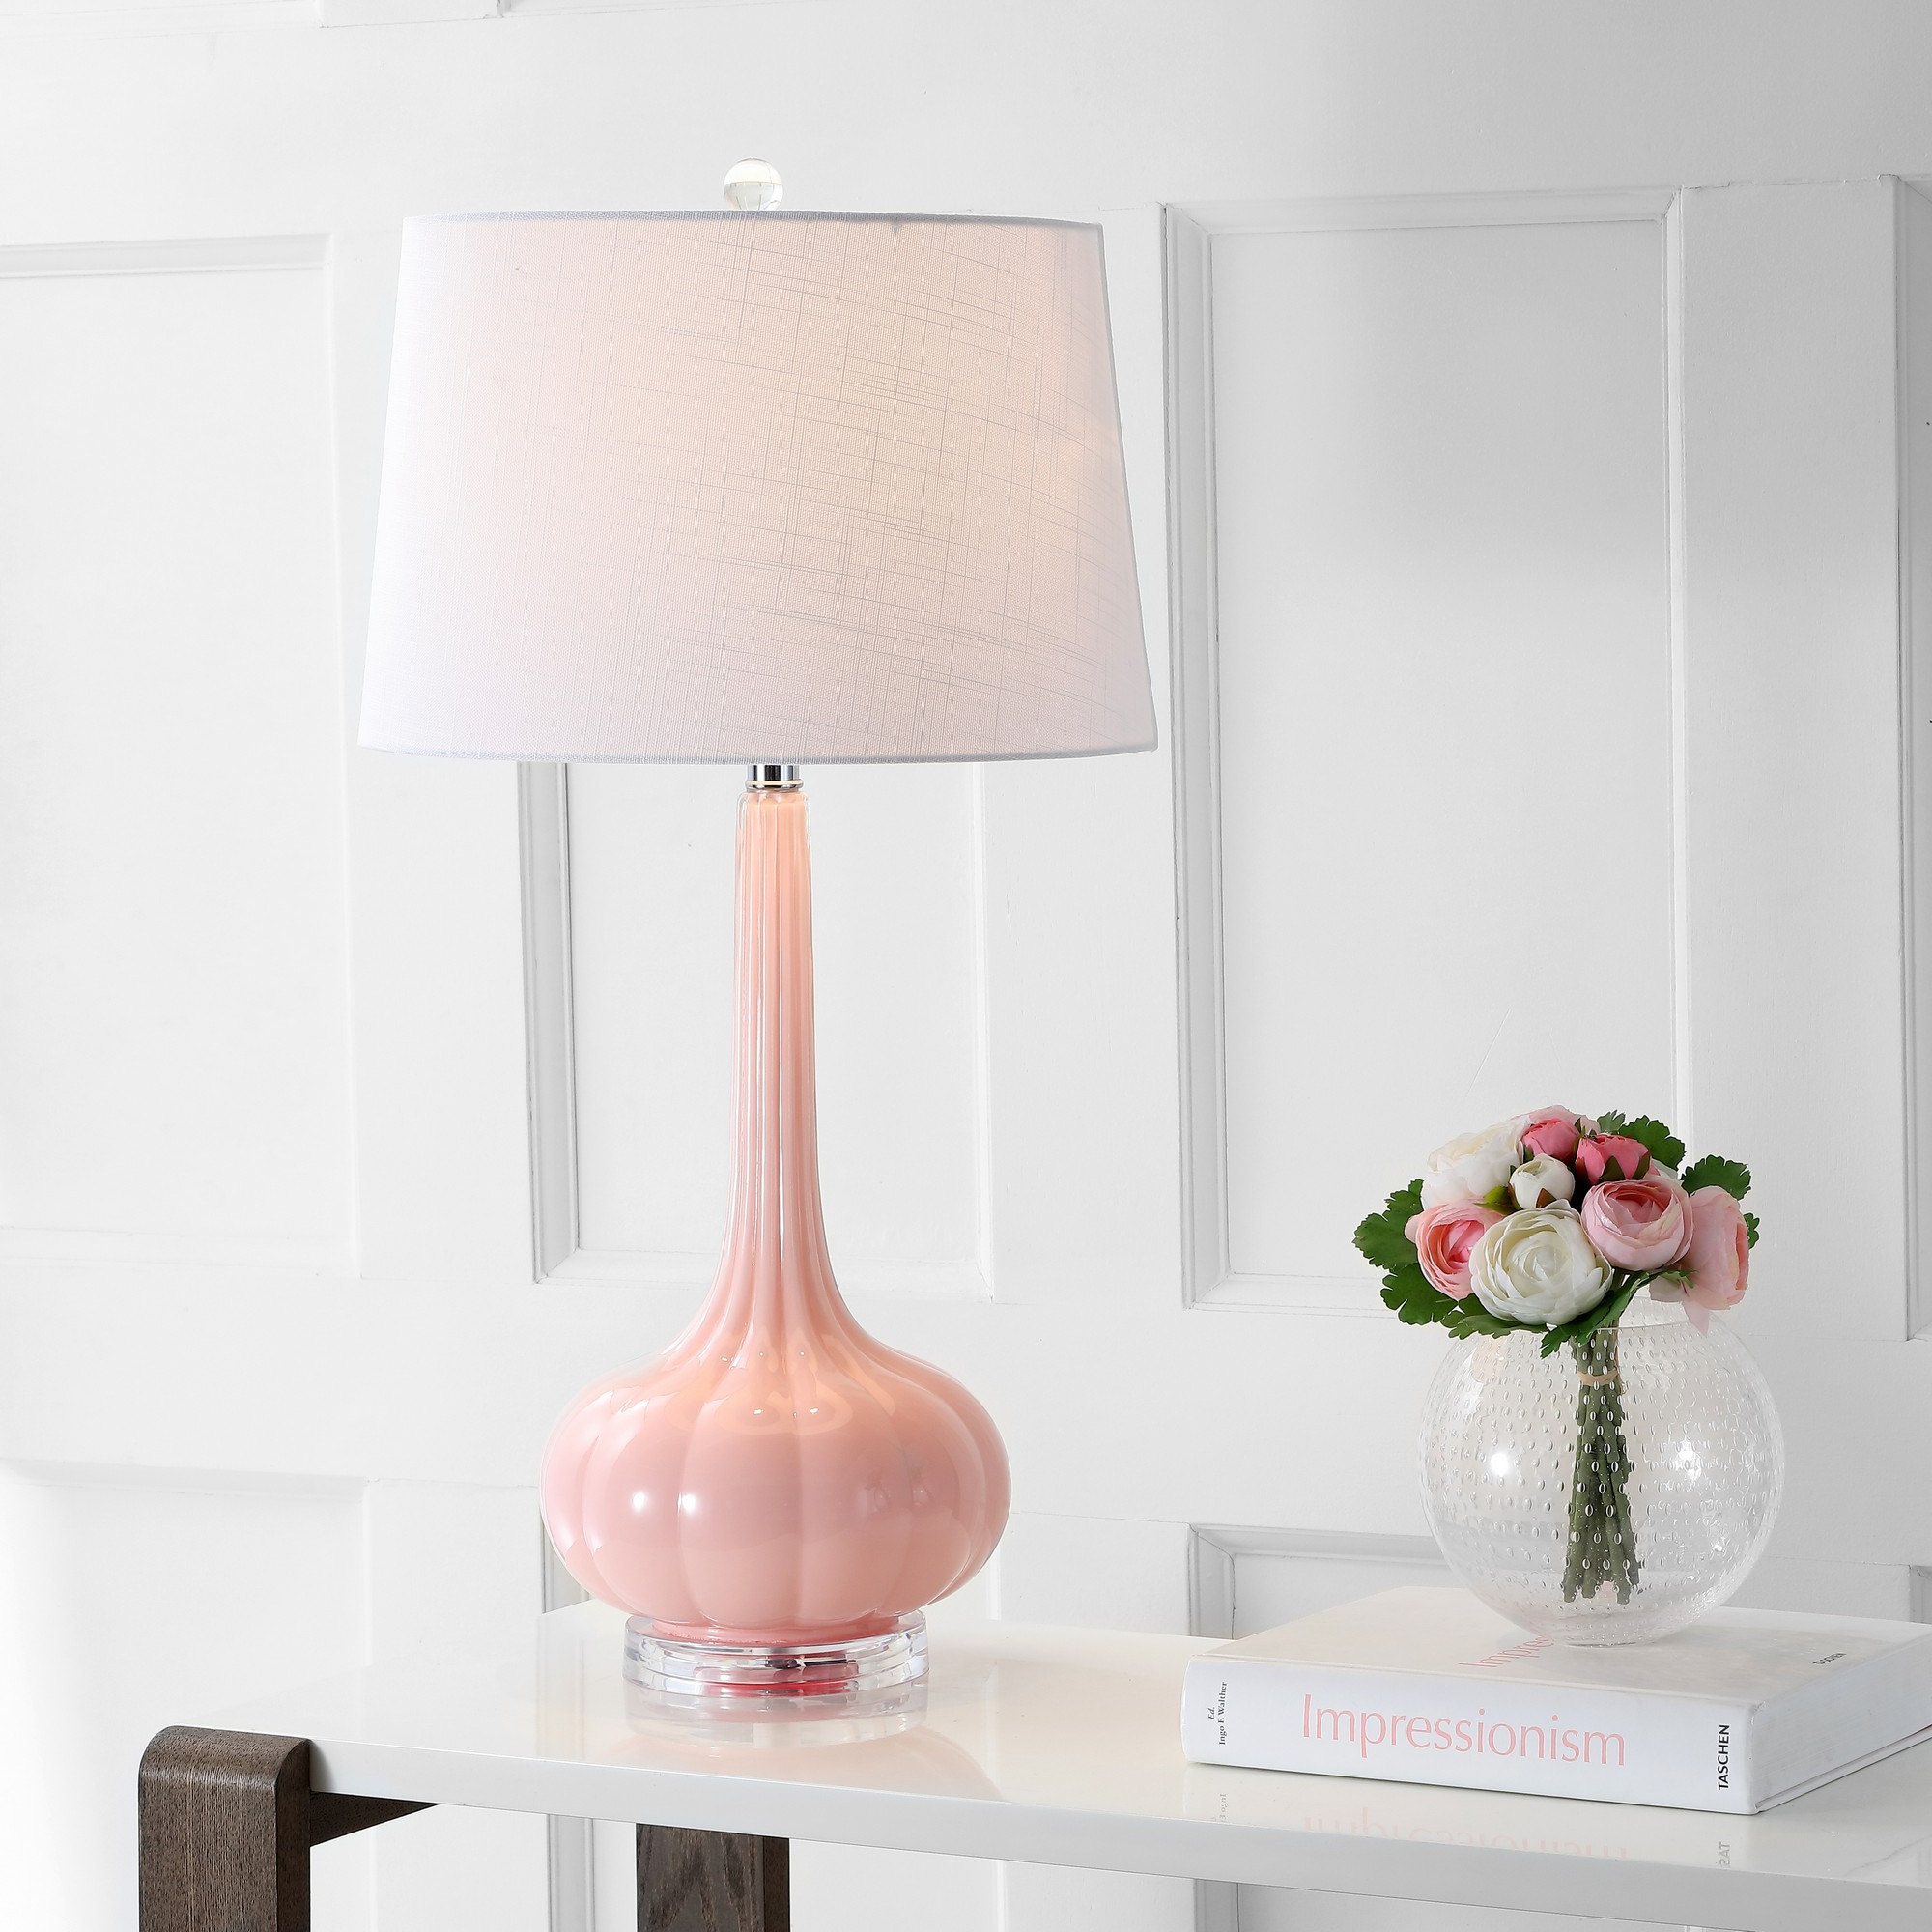 Bette 28.5" Glass Teardrop LED Table Lamp, Pink (Set of 2) - image 3 of 6